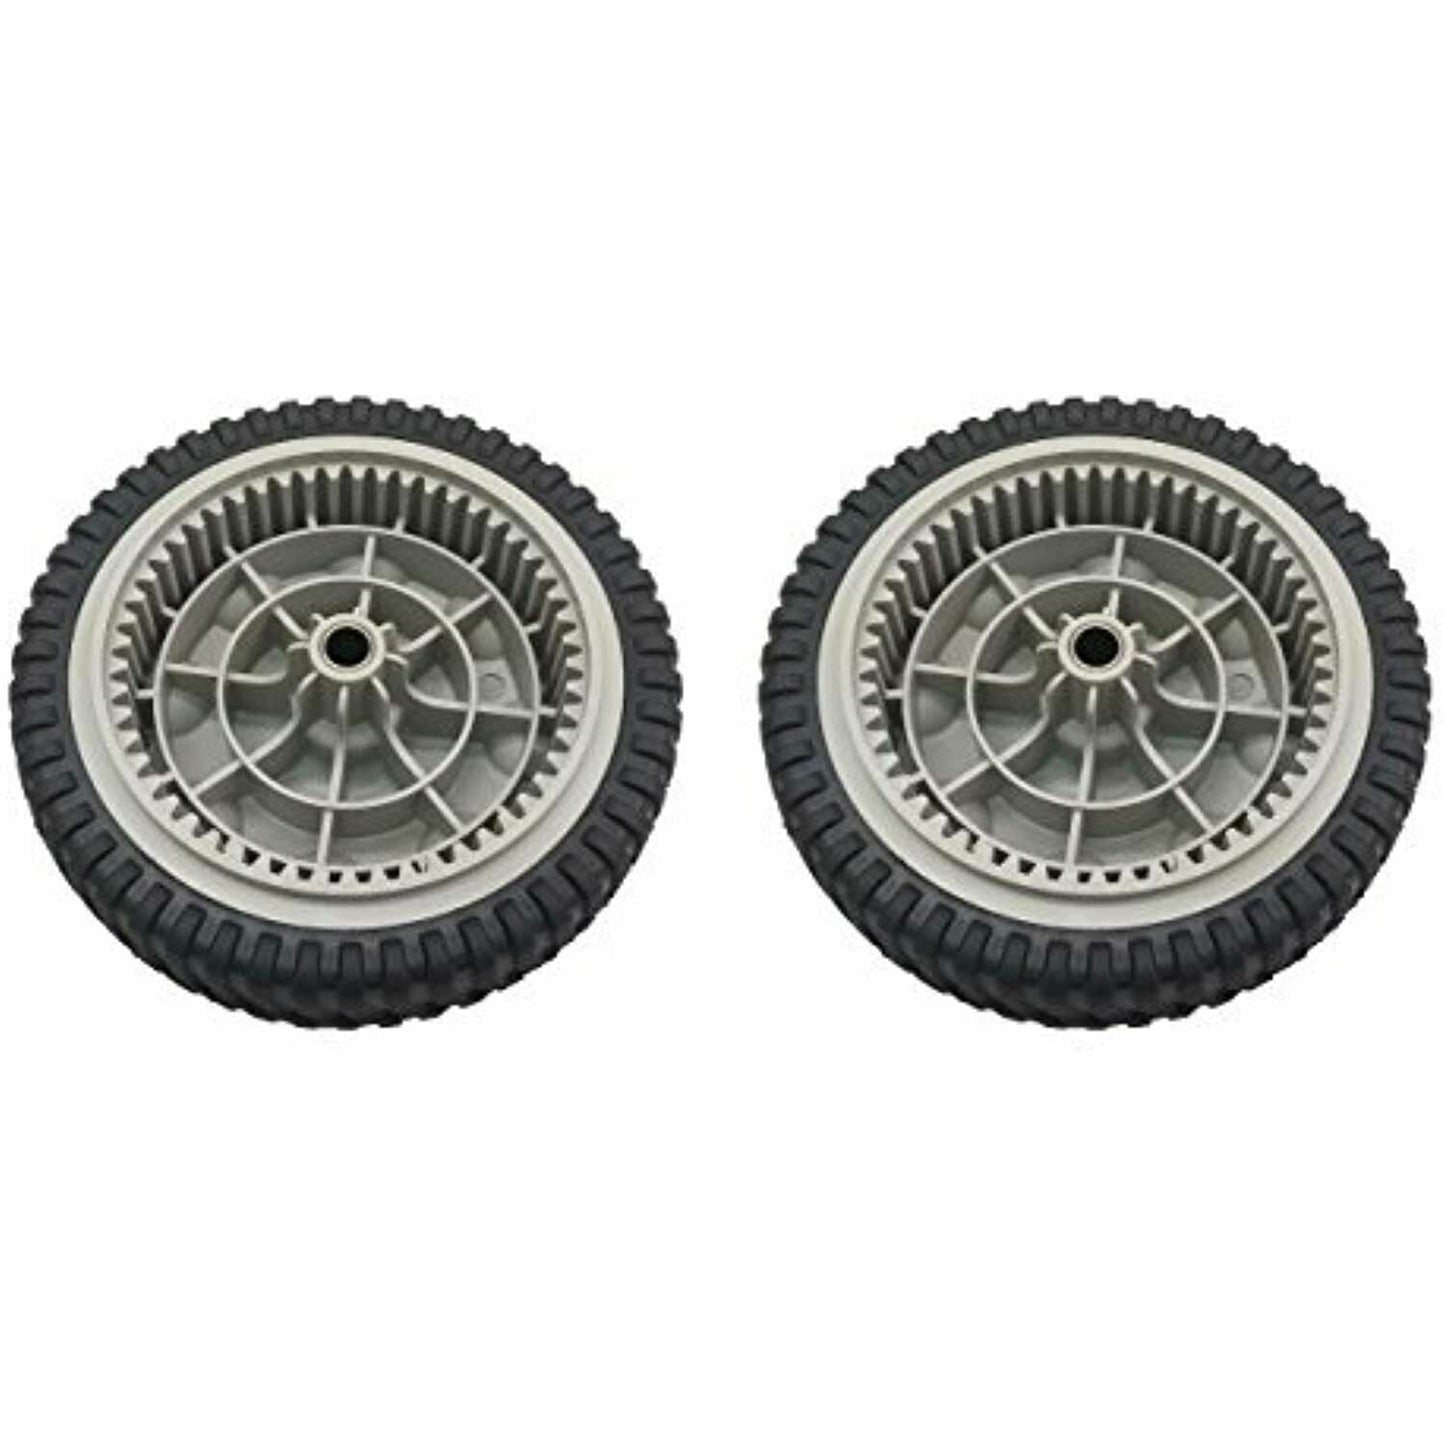 Proven Part  Push Mower Front Drive Wheel Geared Gray Compatible With Mtd 734-04018C 734-04018B 734-04018A 734-04018 (2 Pack)